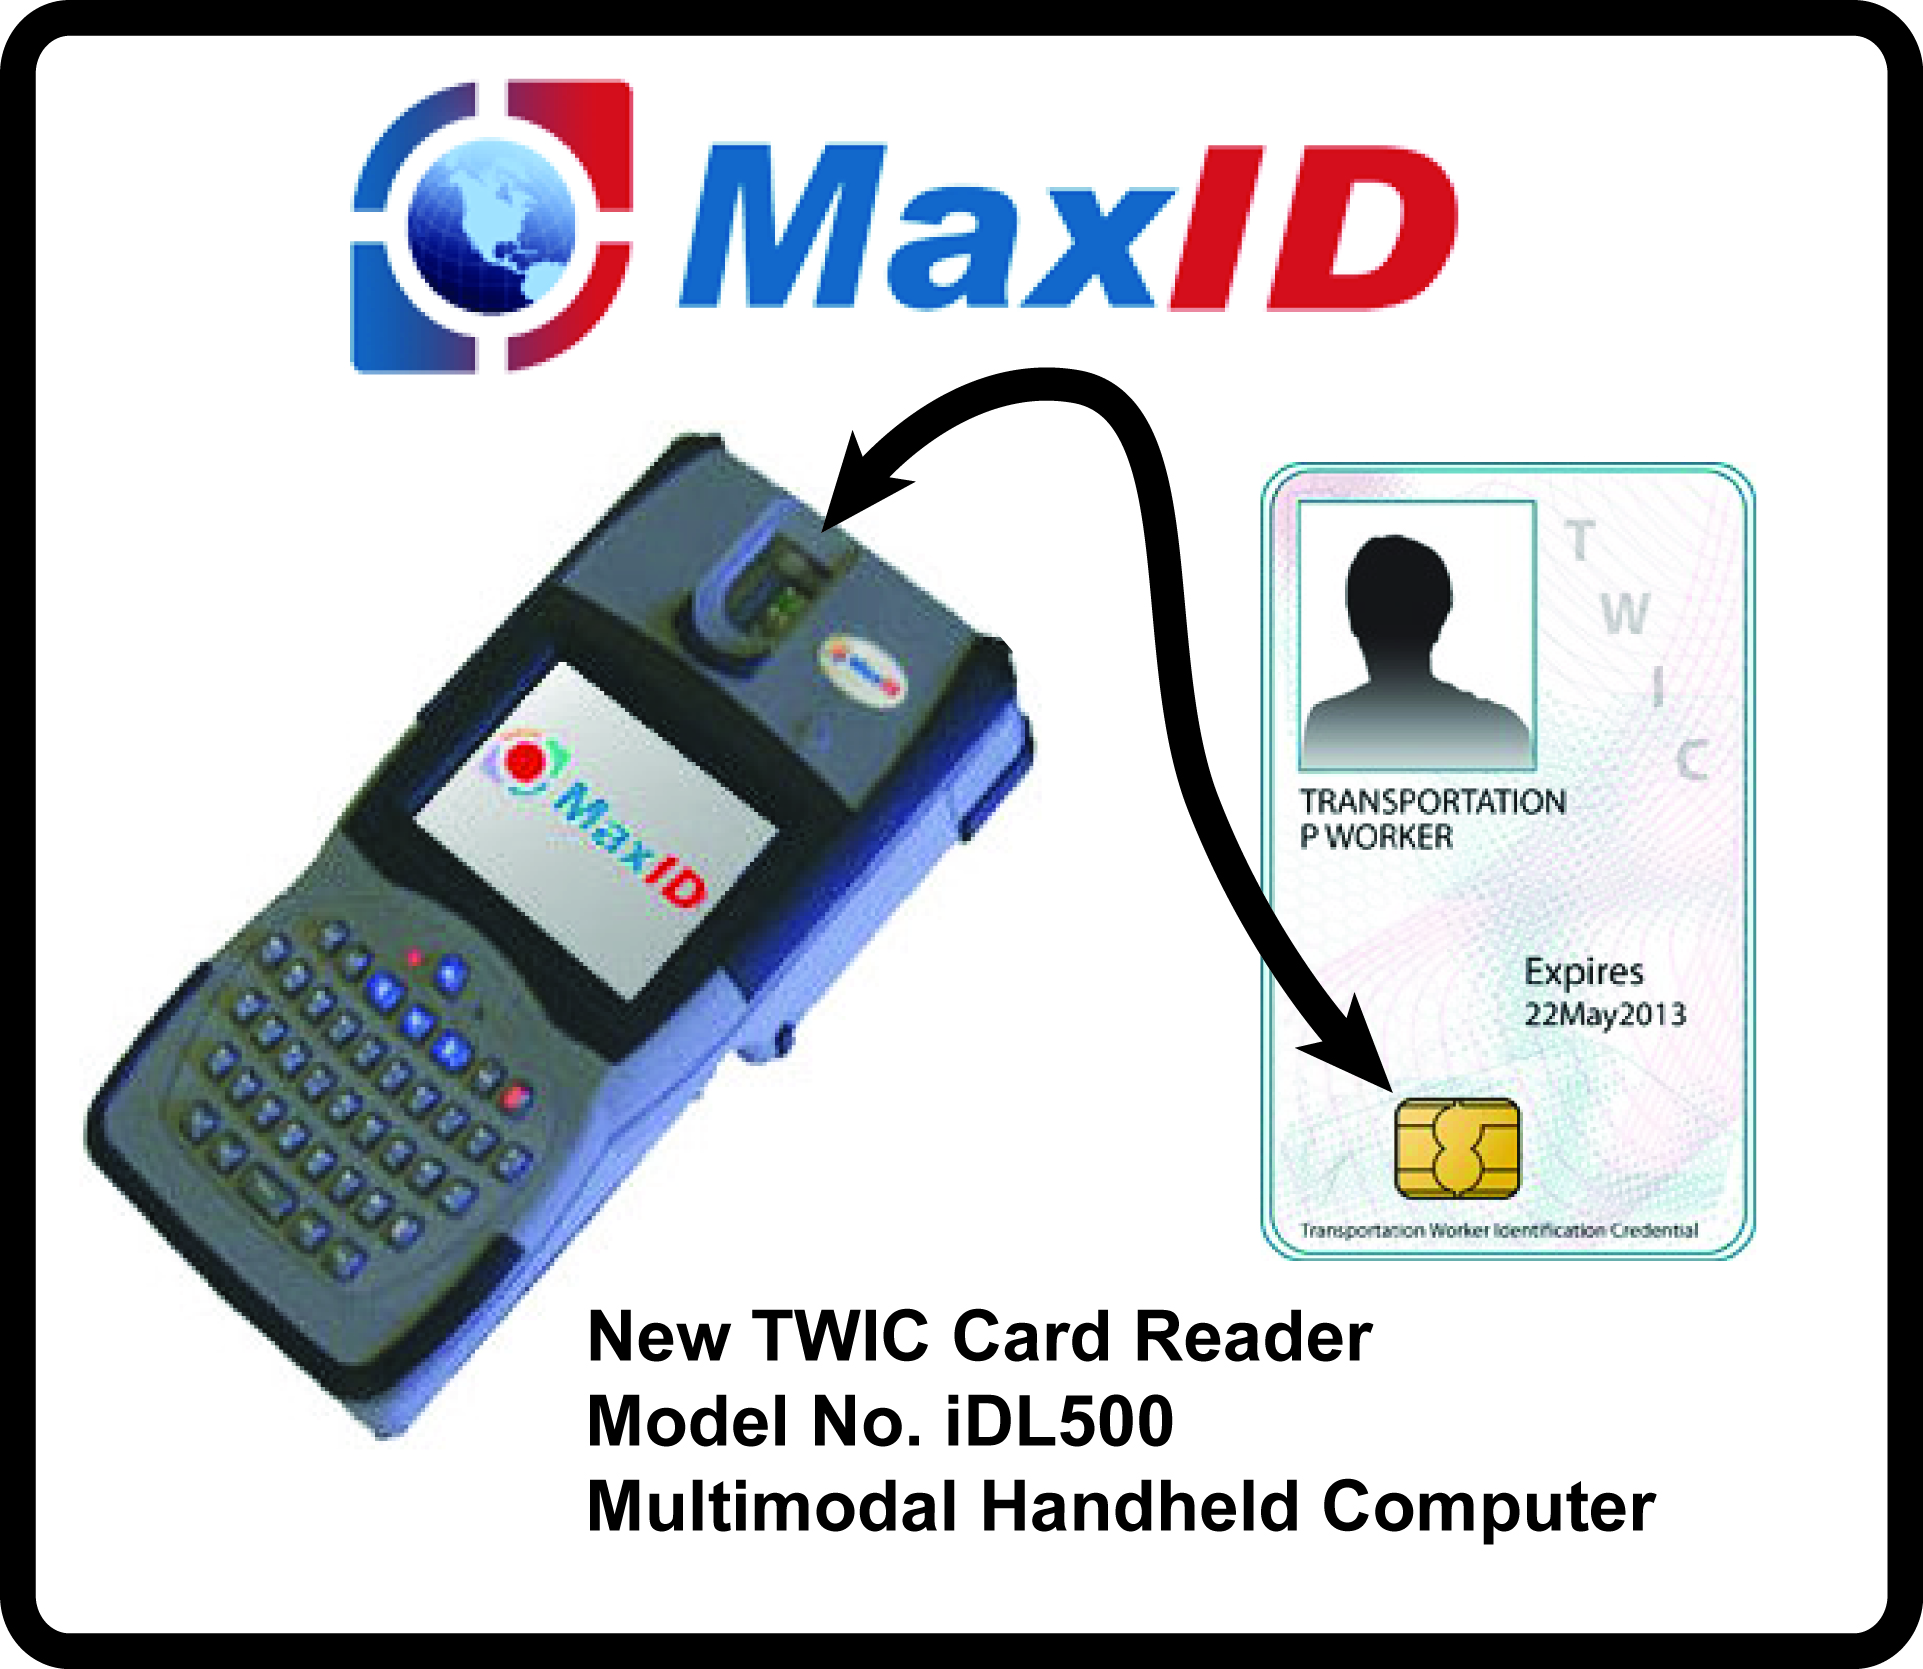 Order Replacement Twic Card